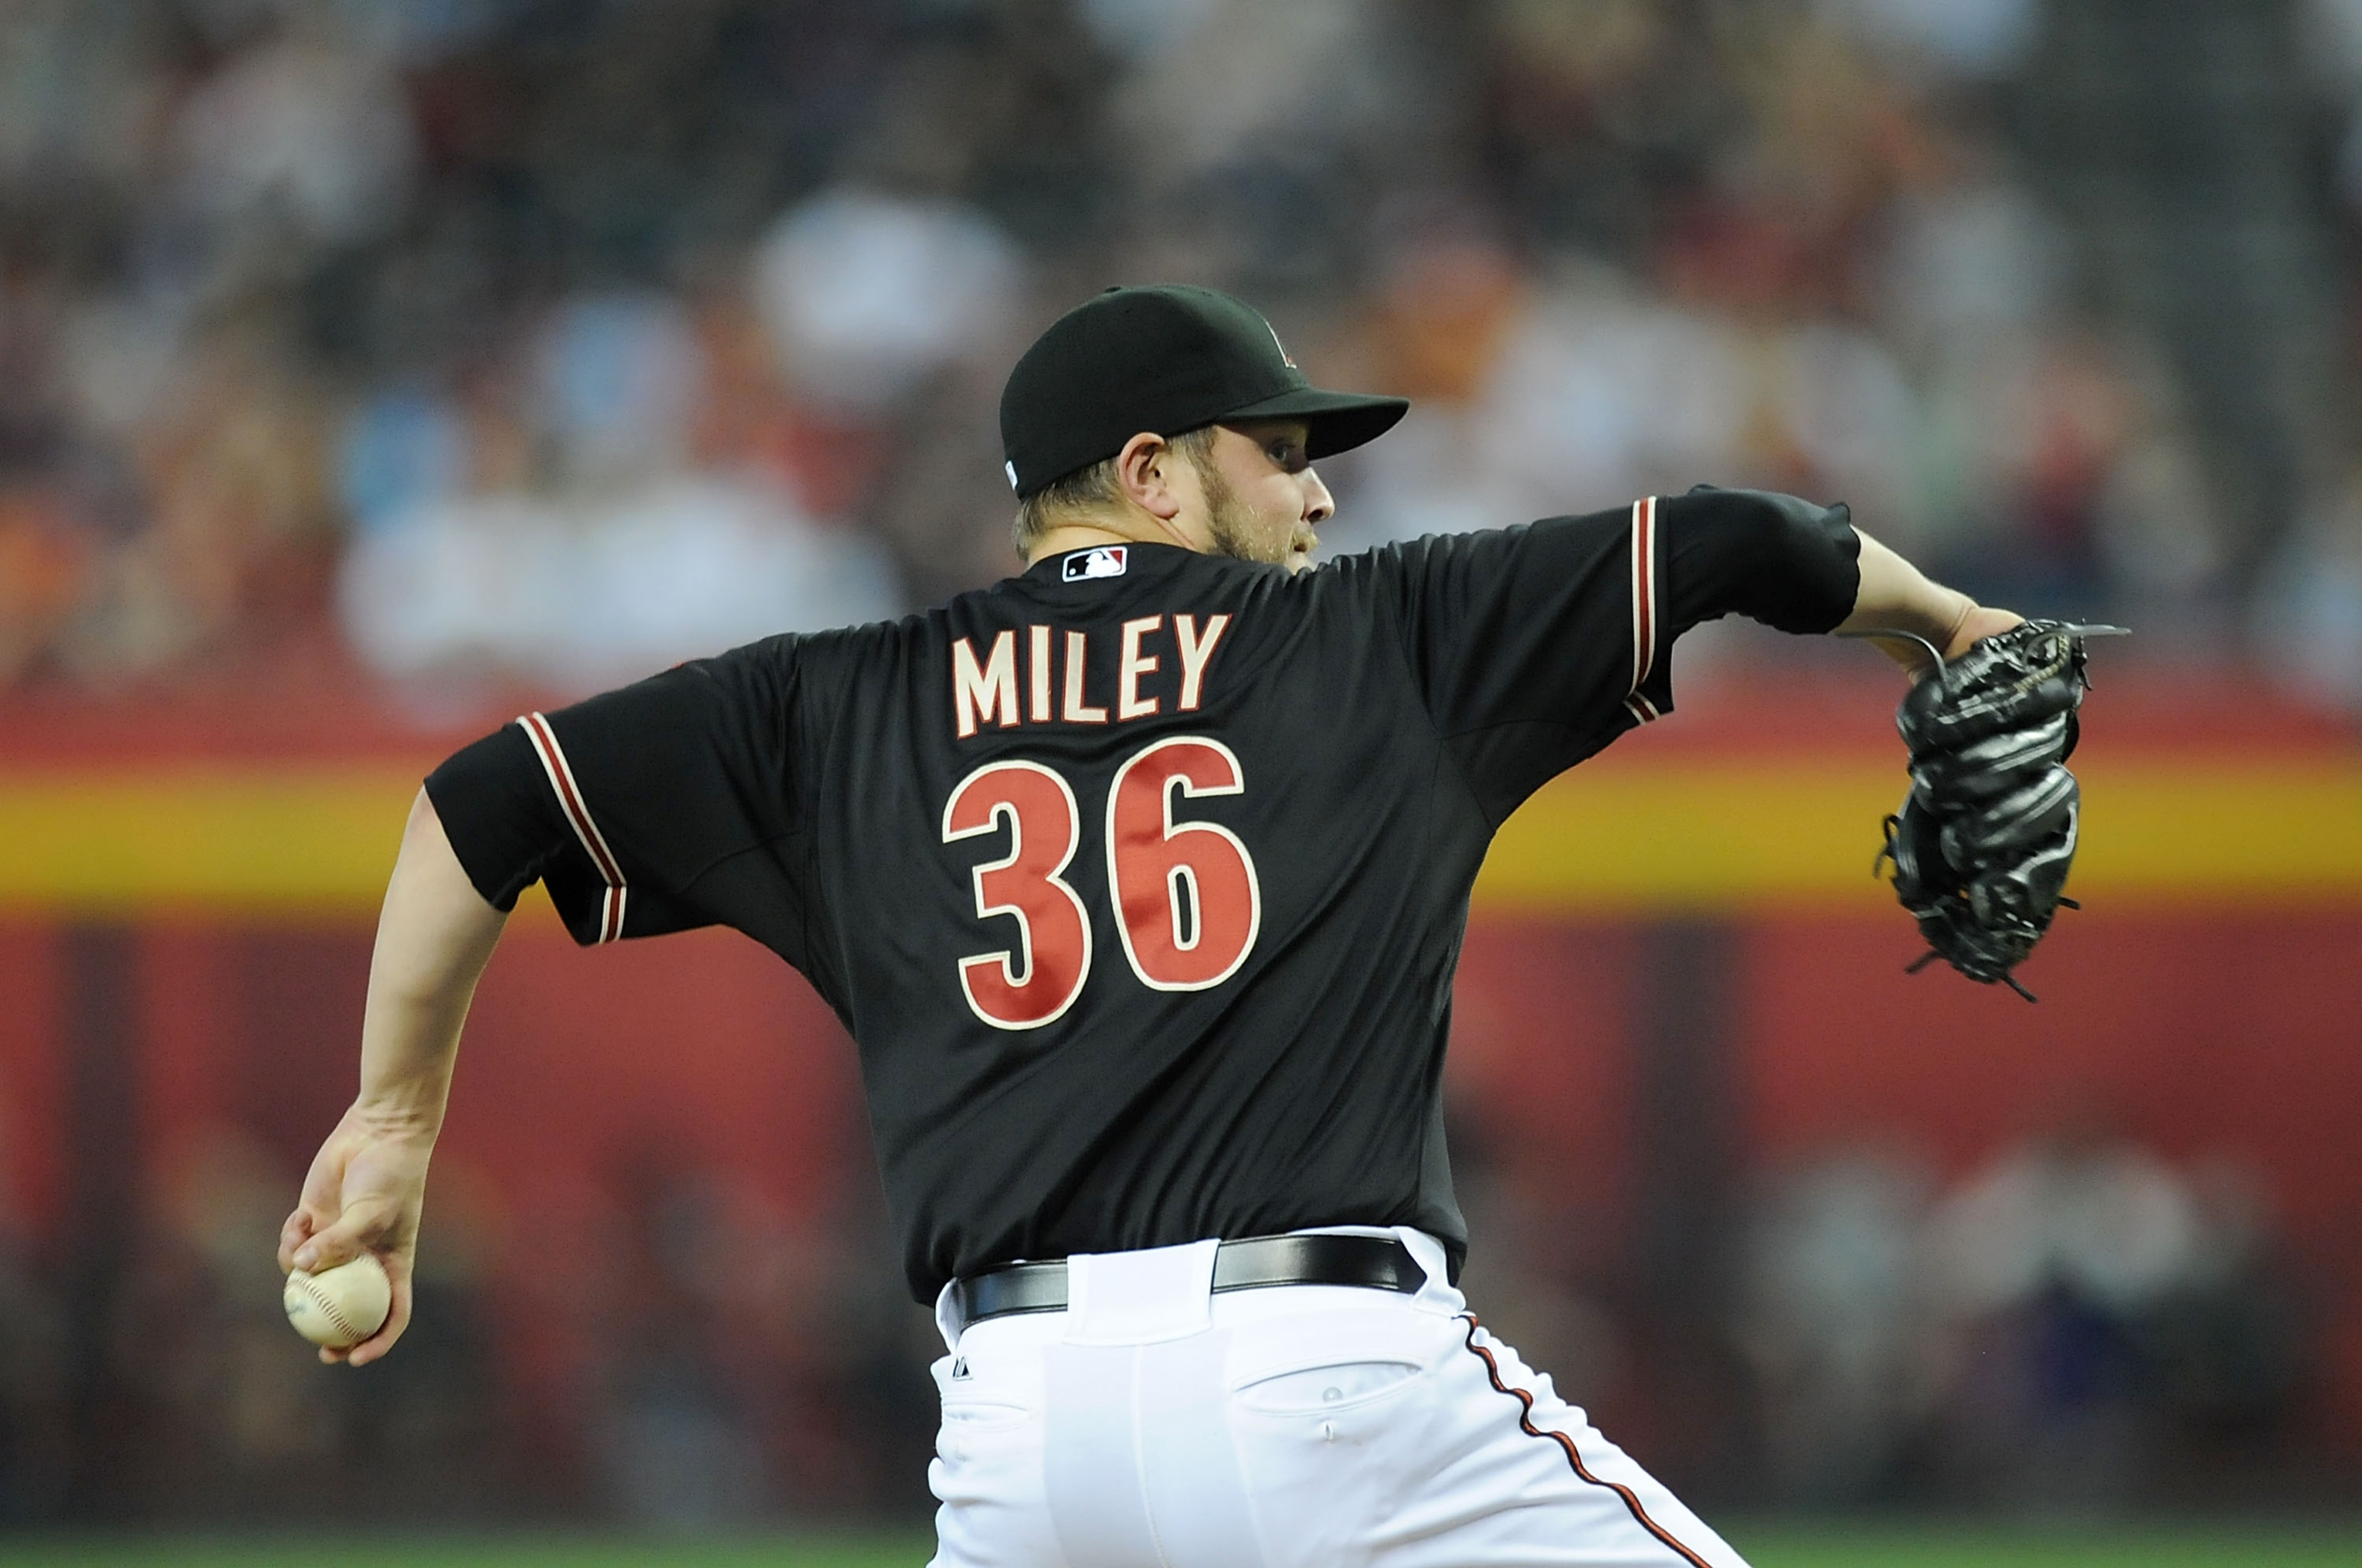 PHOENIX, AZ - AUGUST 11:  Wade Miley #36 of the Arizona Diamondbacks delivers a pitch against the Washington Nationals at Chase Field on August 11, 2012 in Phoenix, Arizona.  (Photo by Norm Hall/Getty Images)